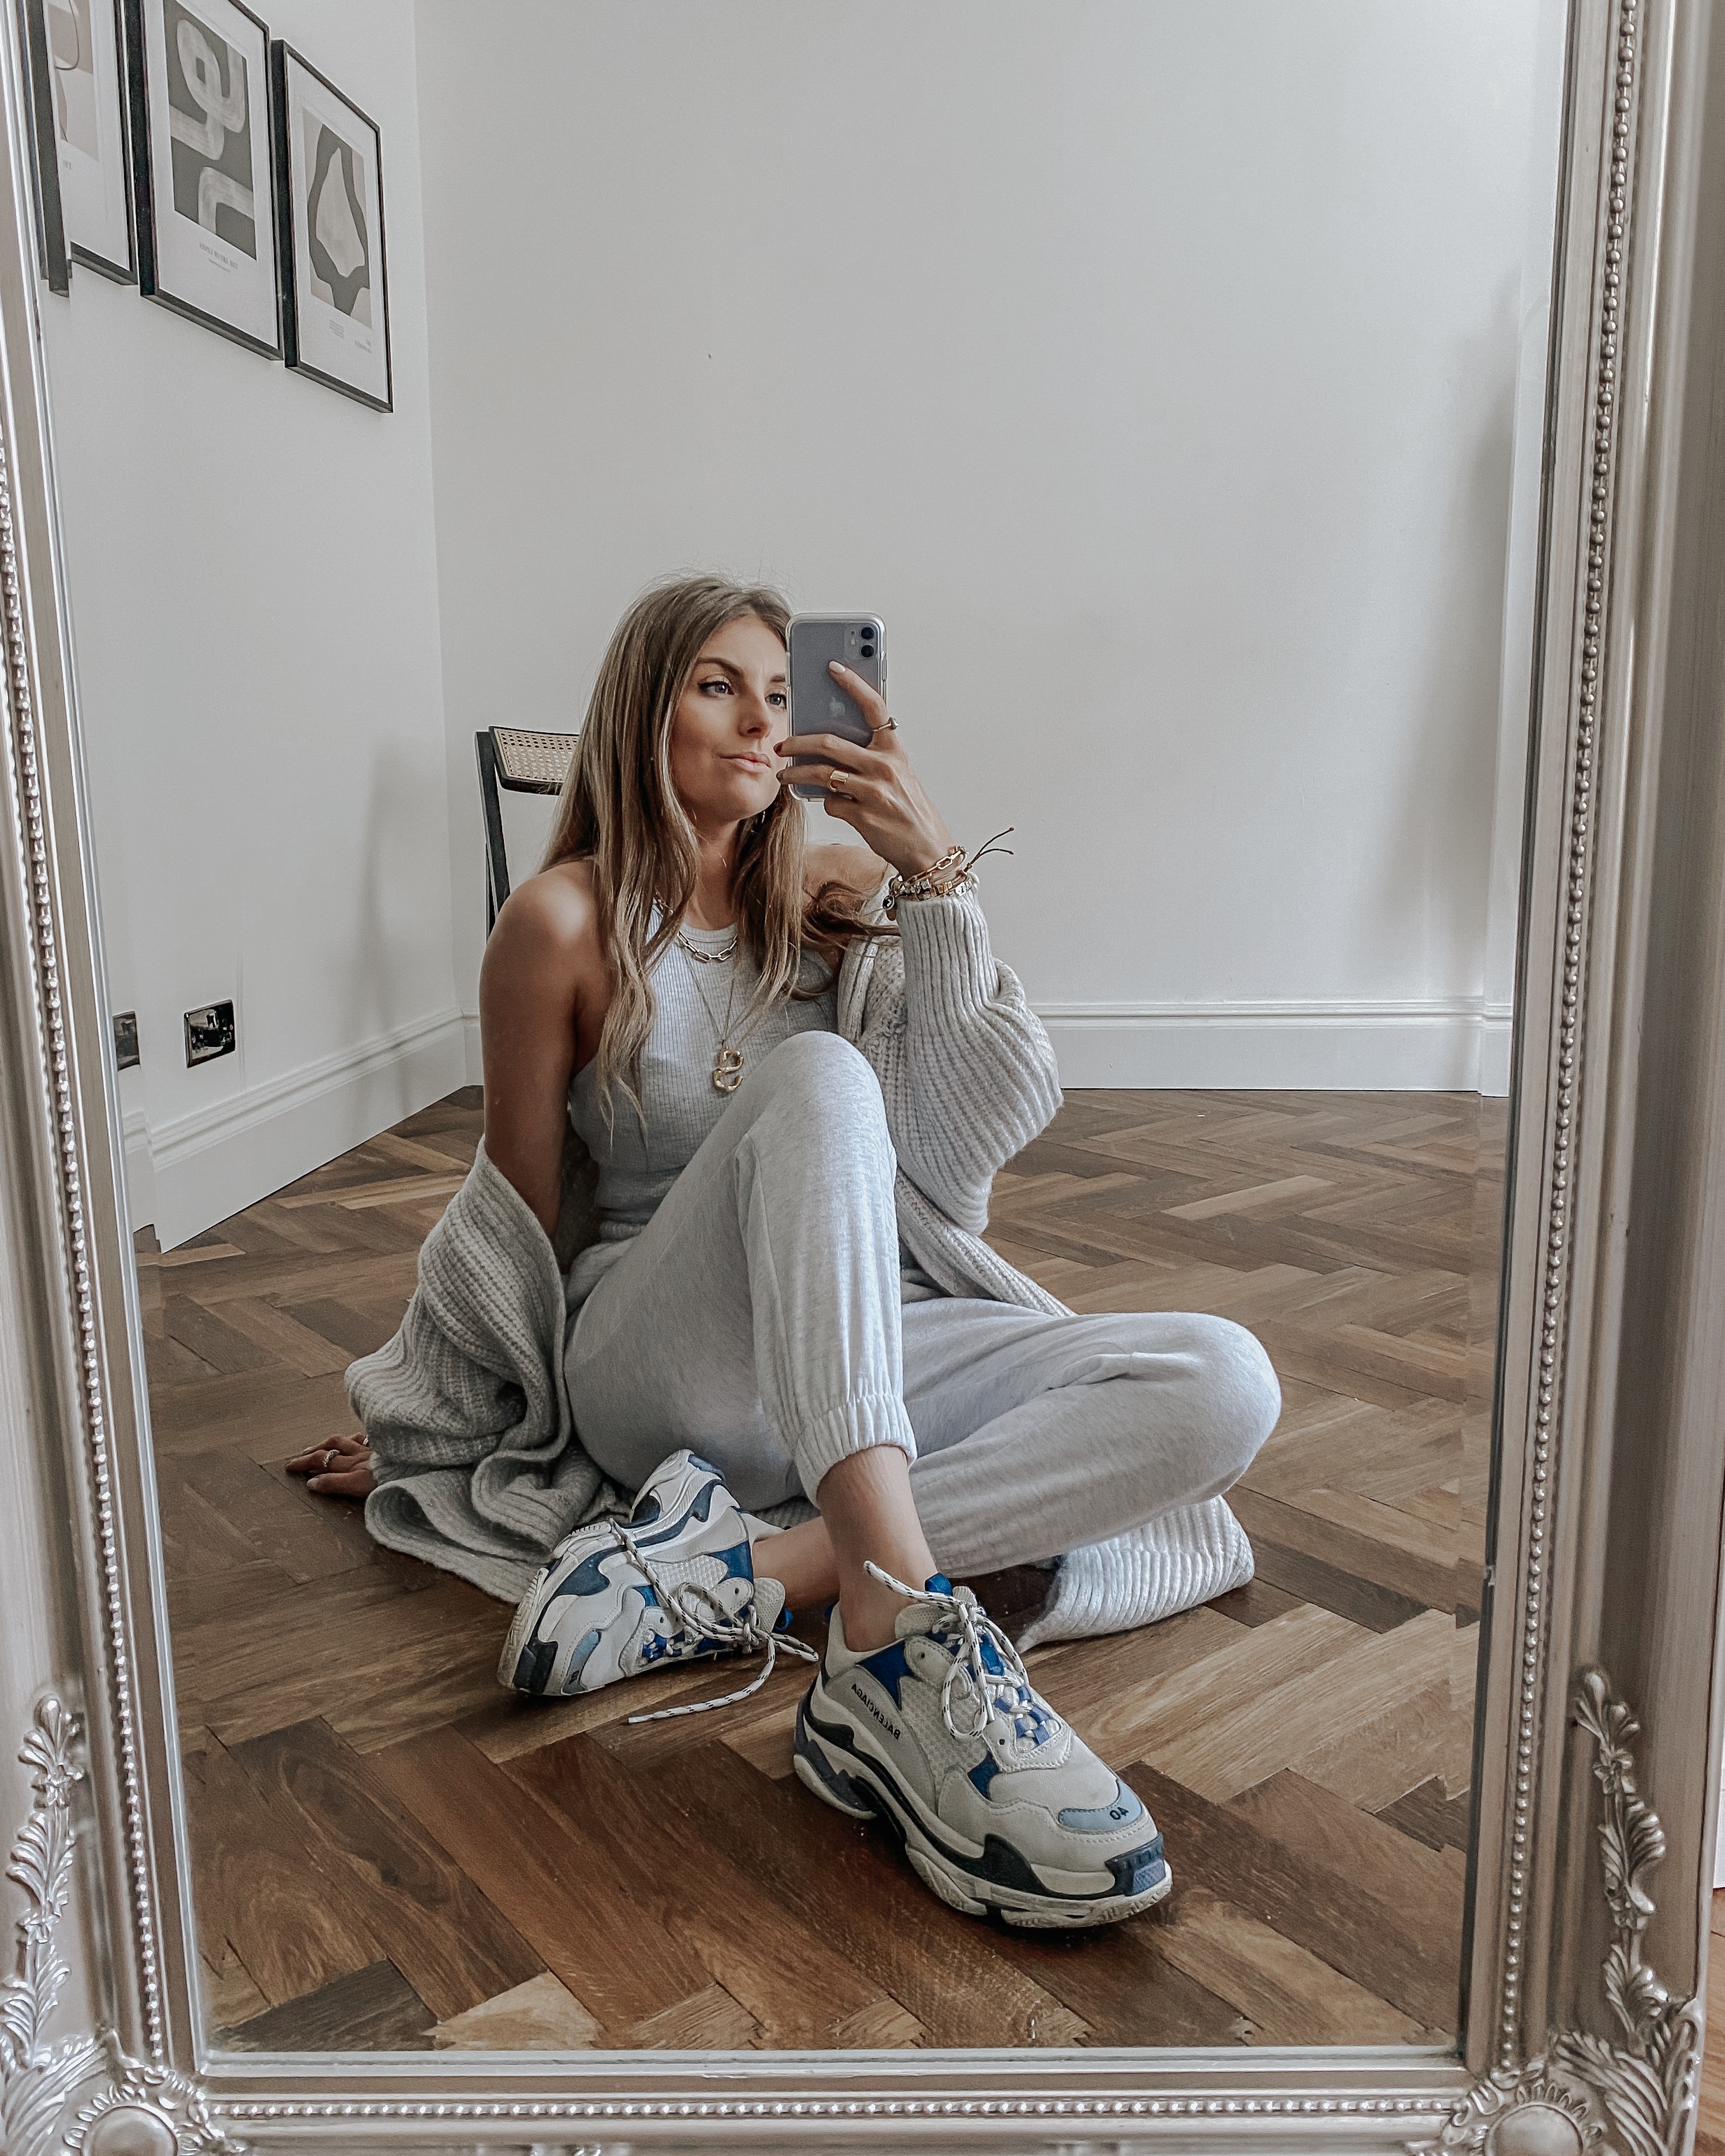 https://usercontent.one/wp/www.lovestylemindfulness.co.uk/wp-content/uploads/2020/04/Styling-Joggers-Topshop-Joggers-Loungewear.jpg